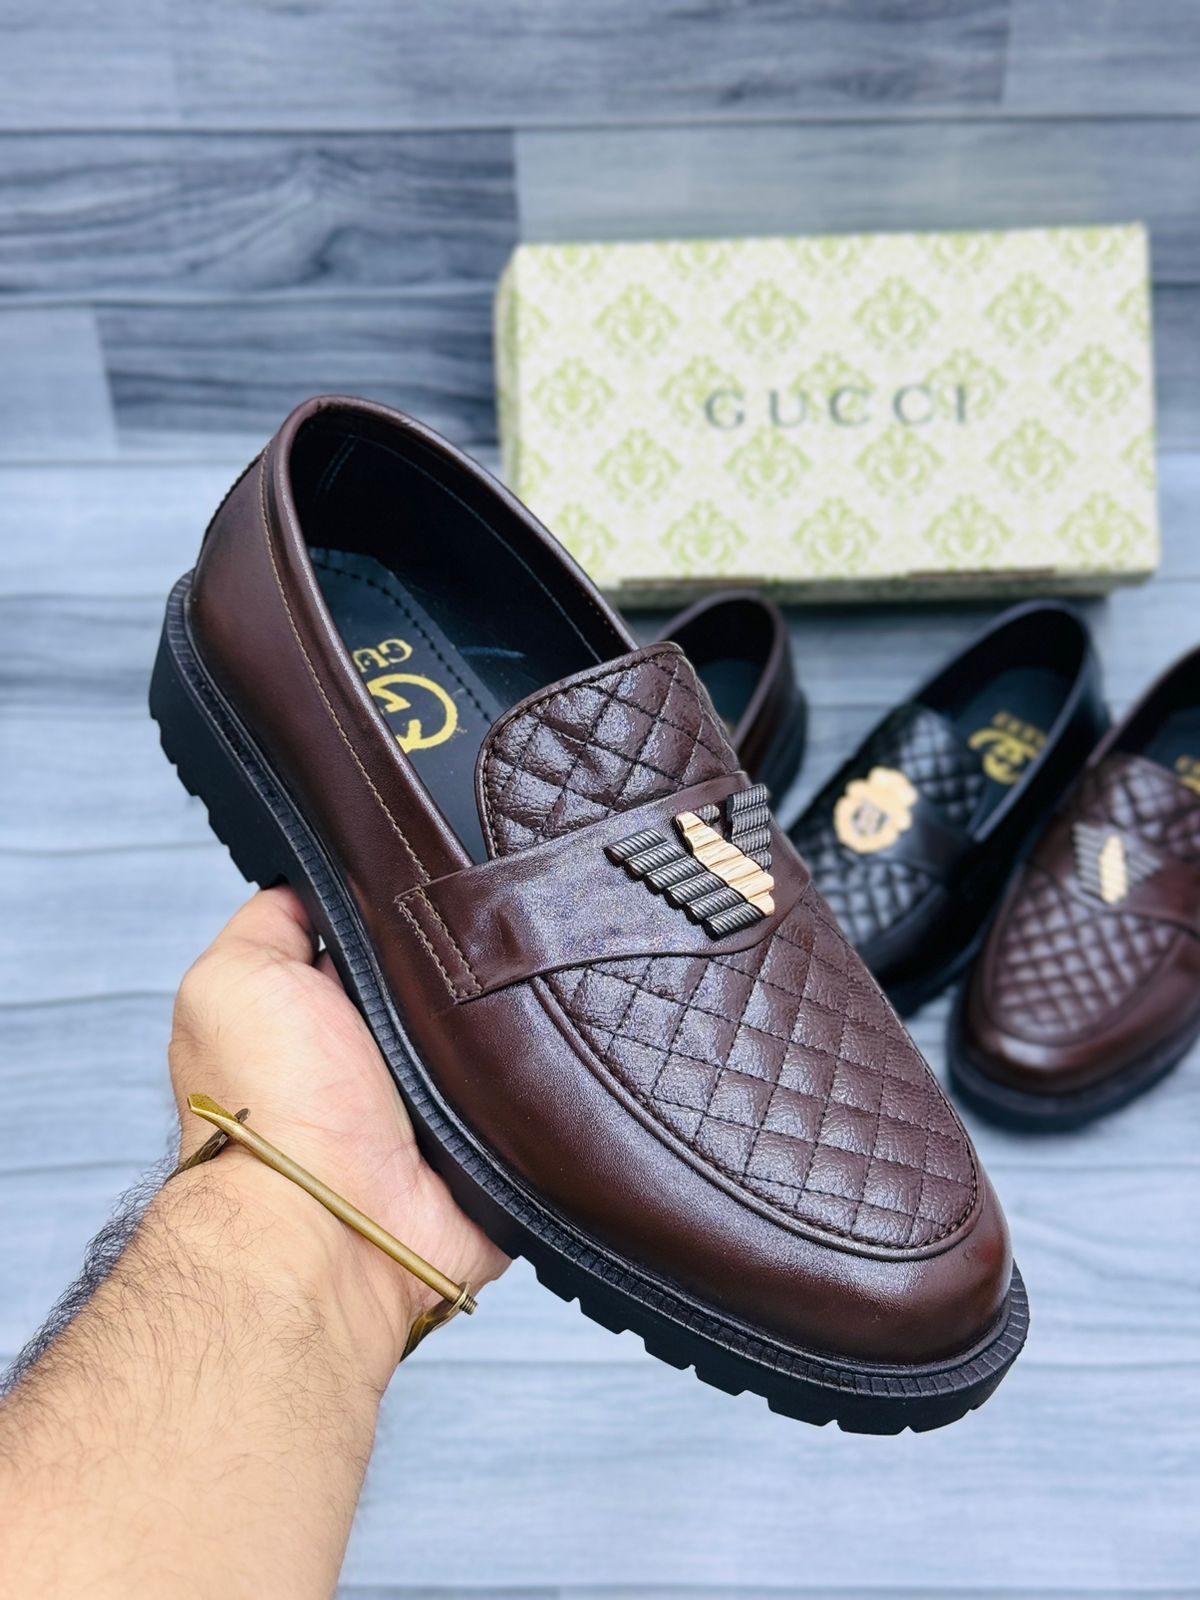 Guccci - Formal D12 - Brown